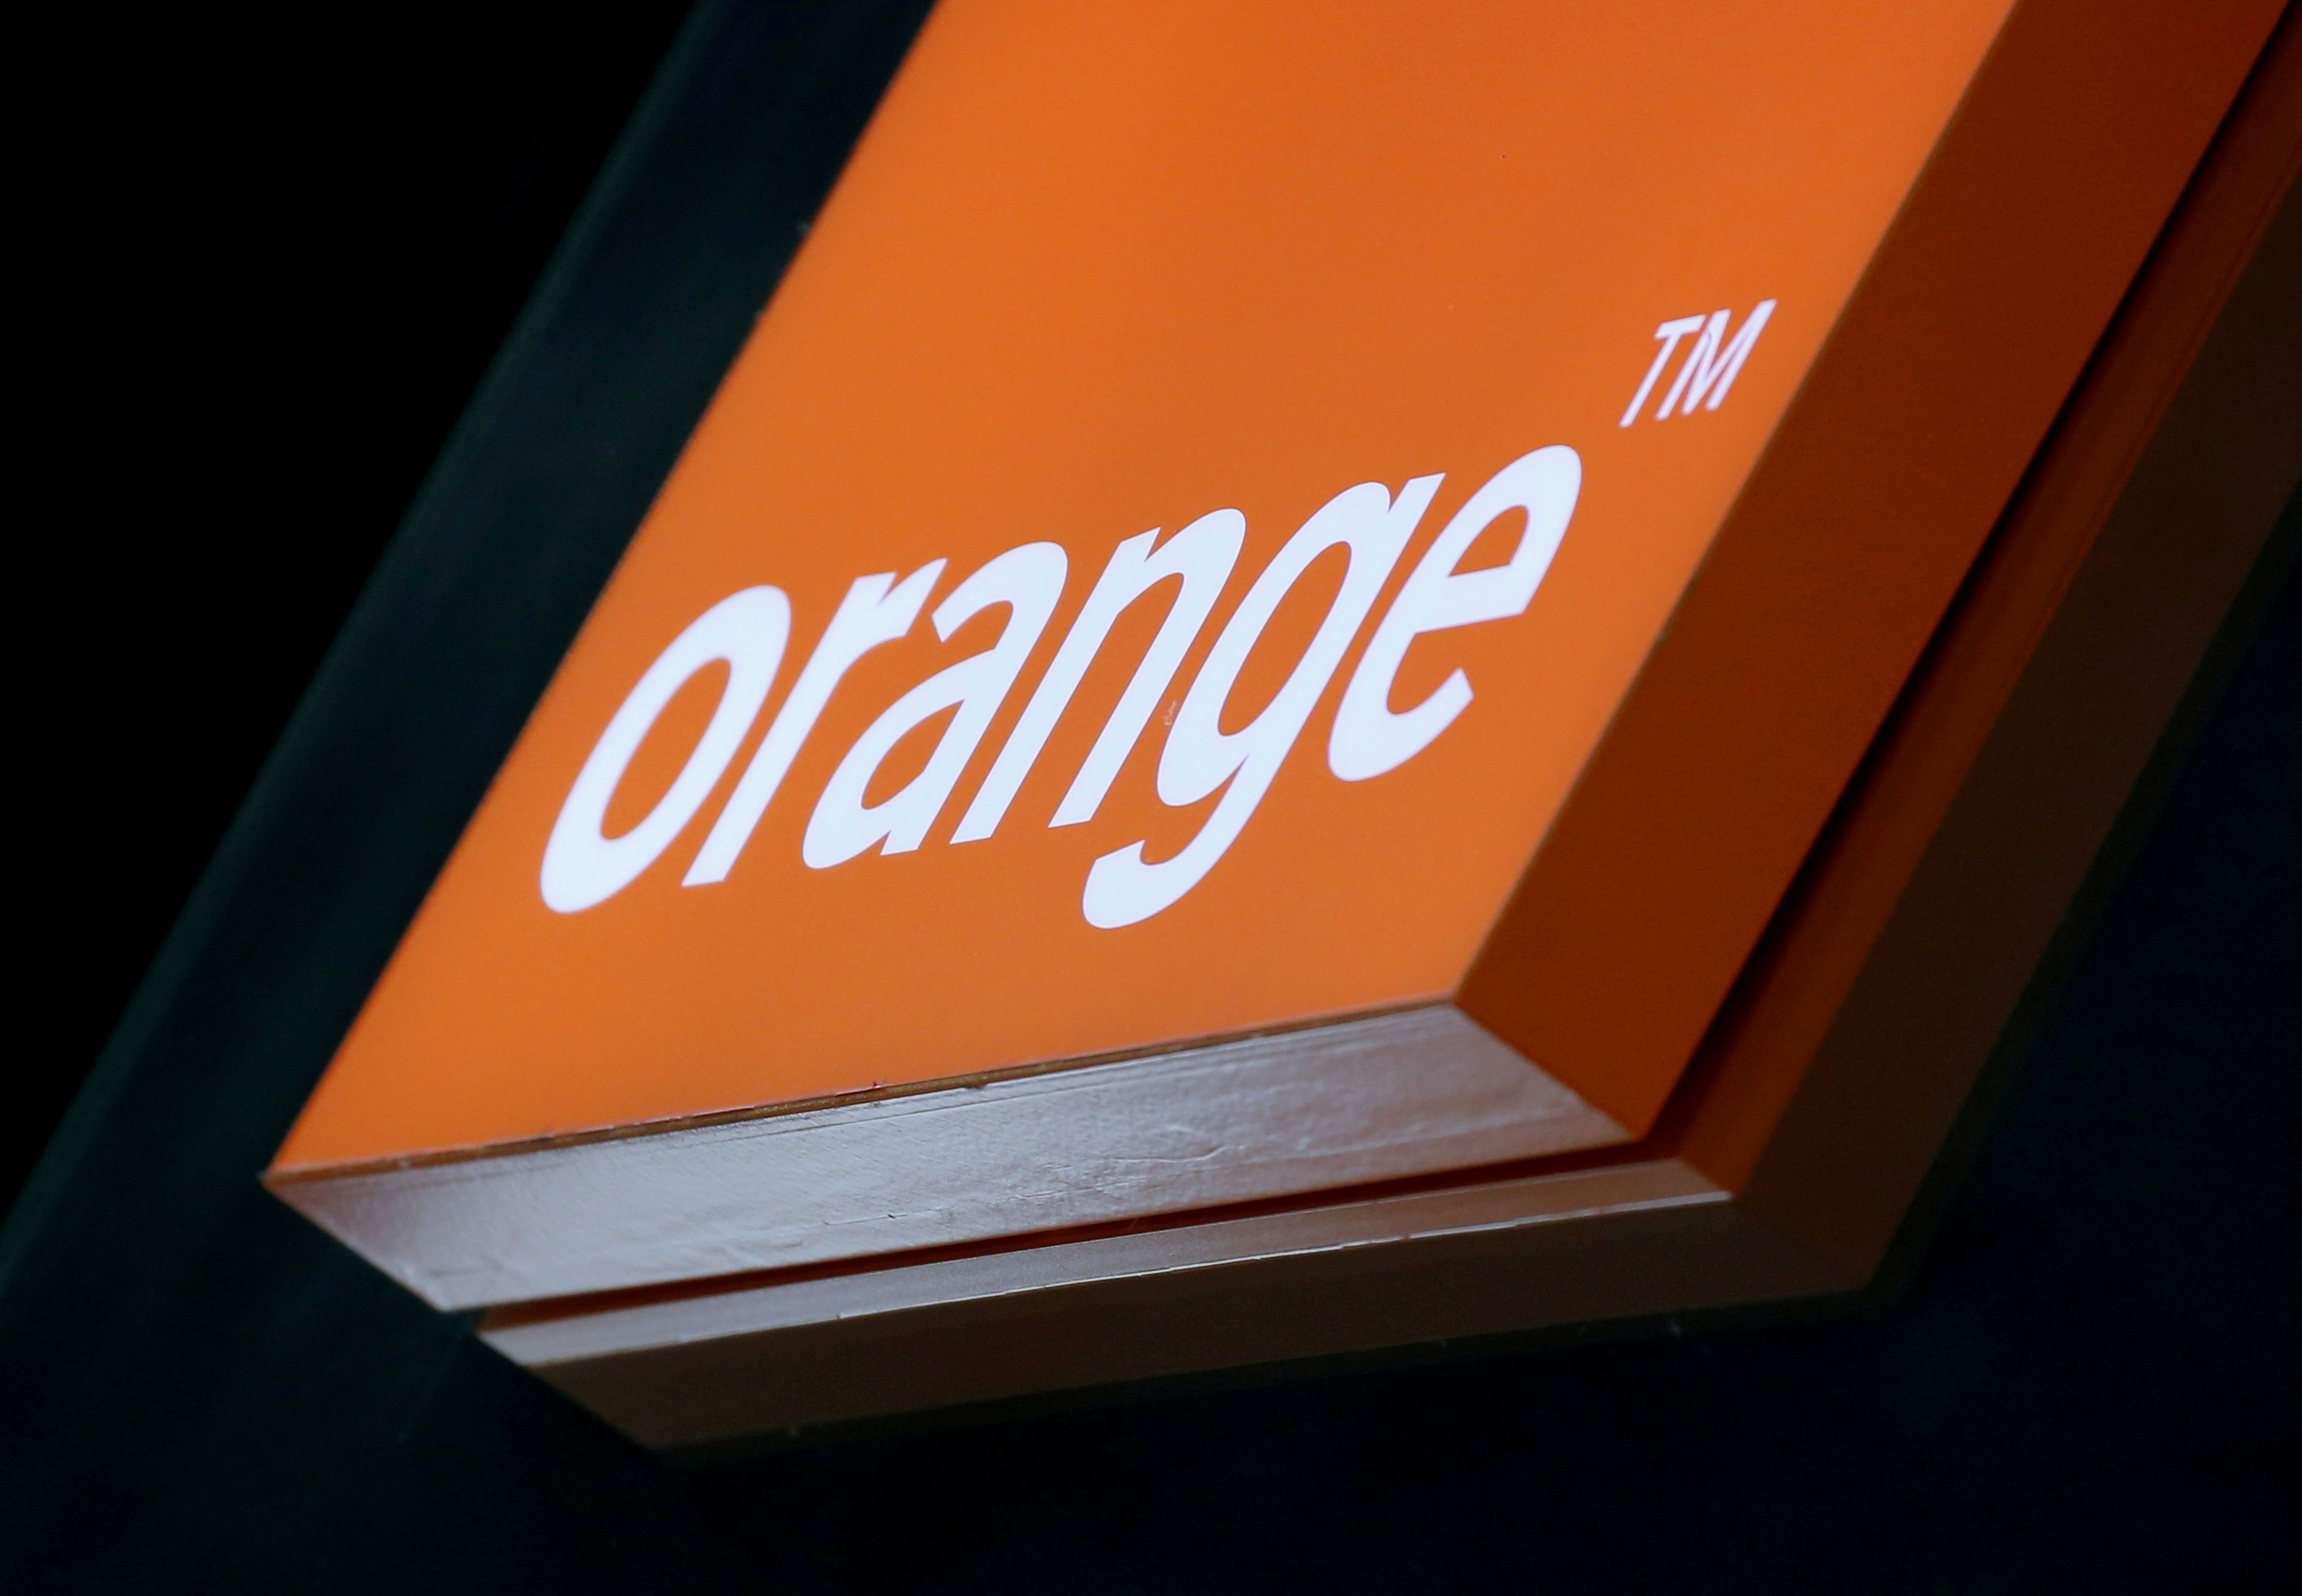 The logo of French telecoms group Orange is pictured in a retail store in Bordeaux, France, October 29, 2019. REUTERS/Regis Duvignau